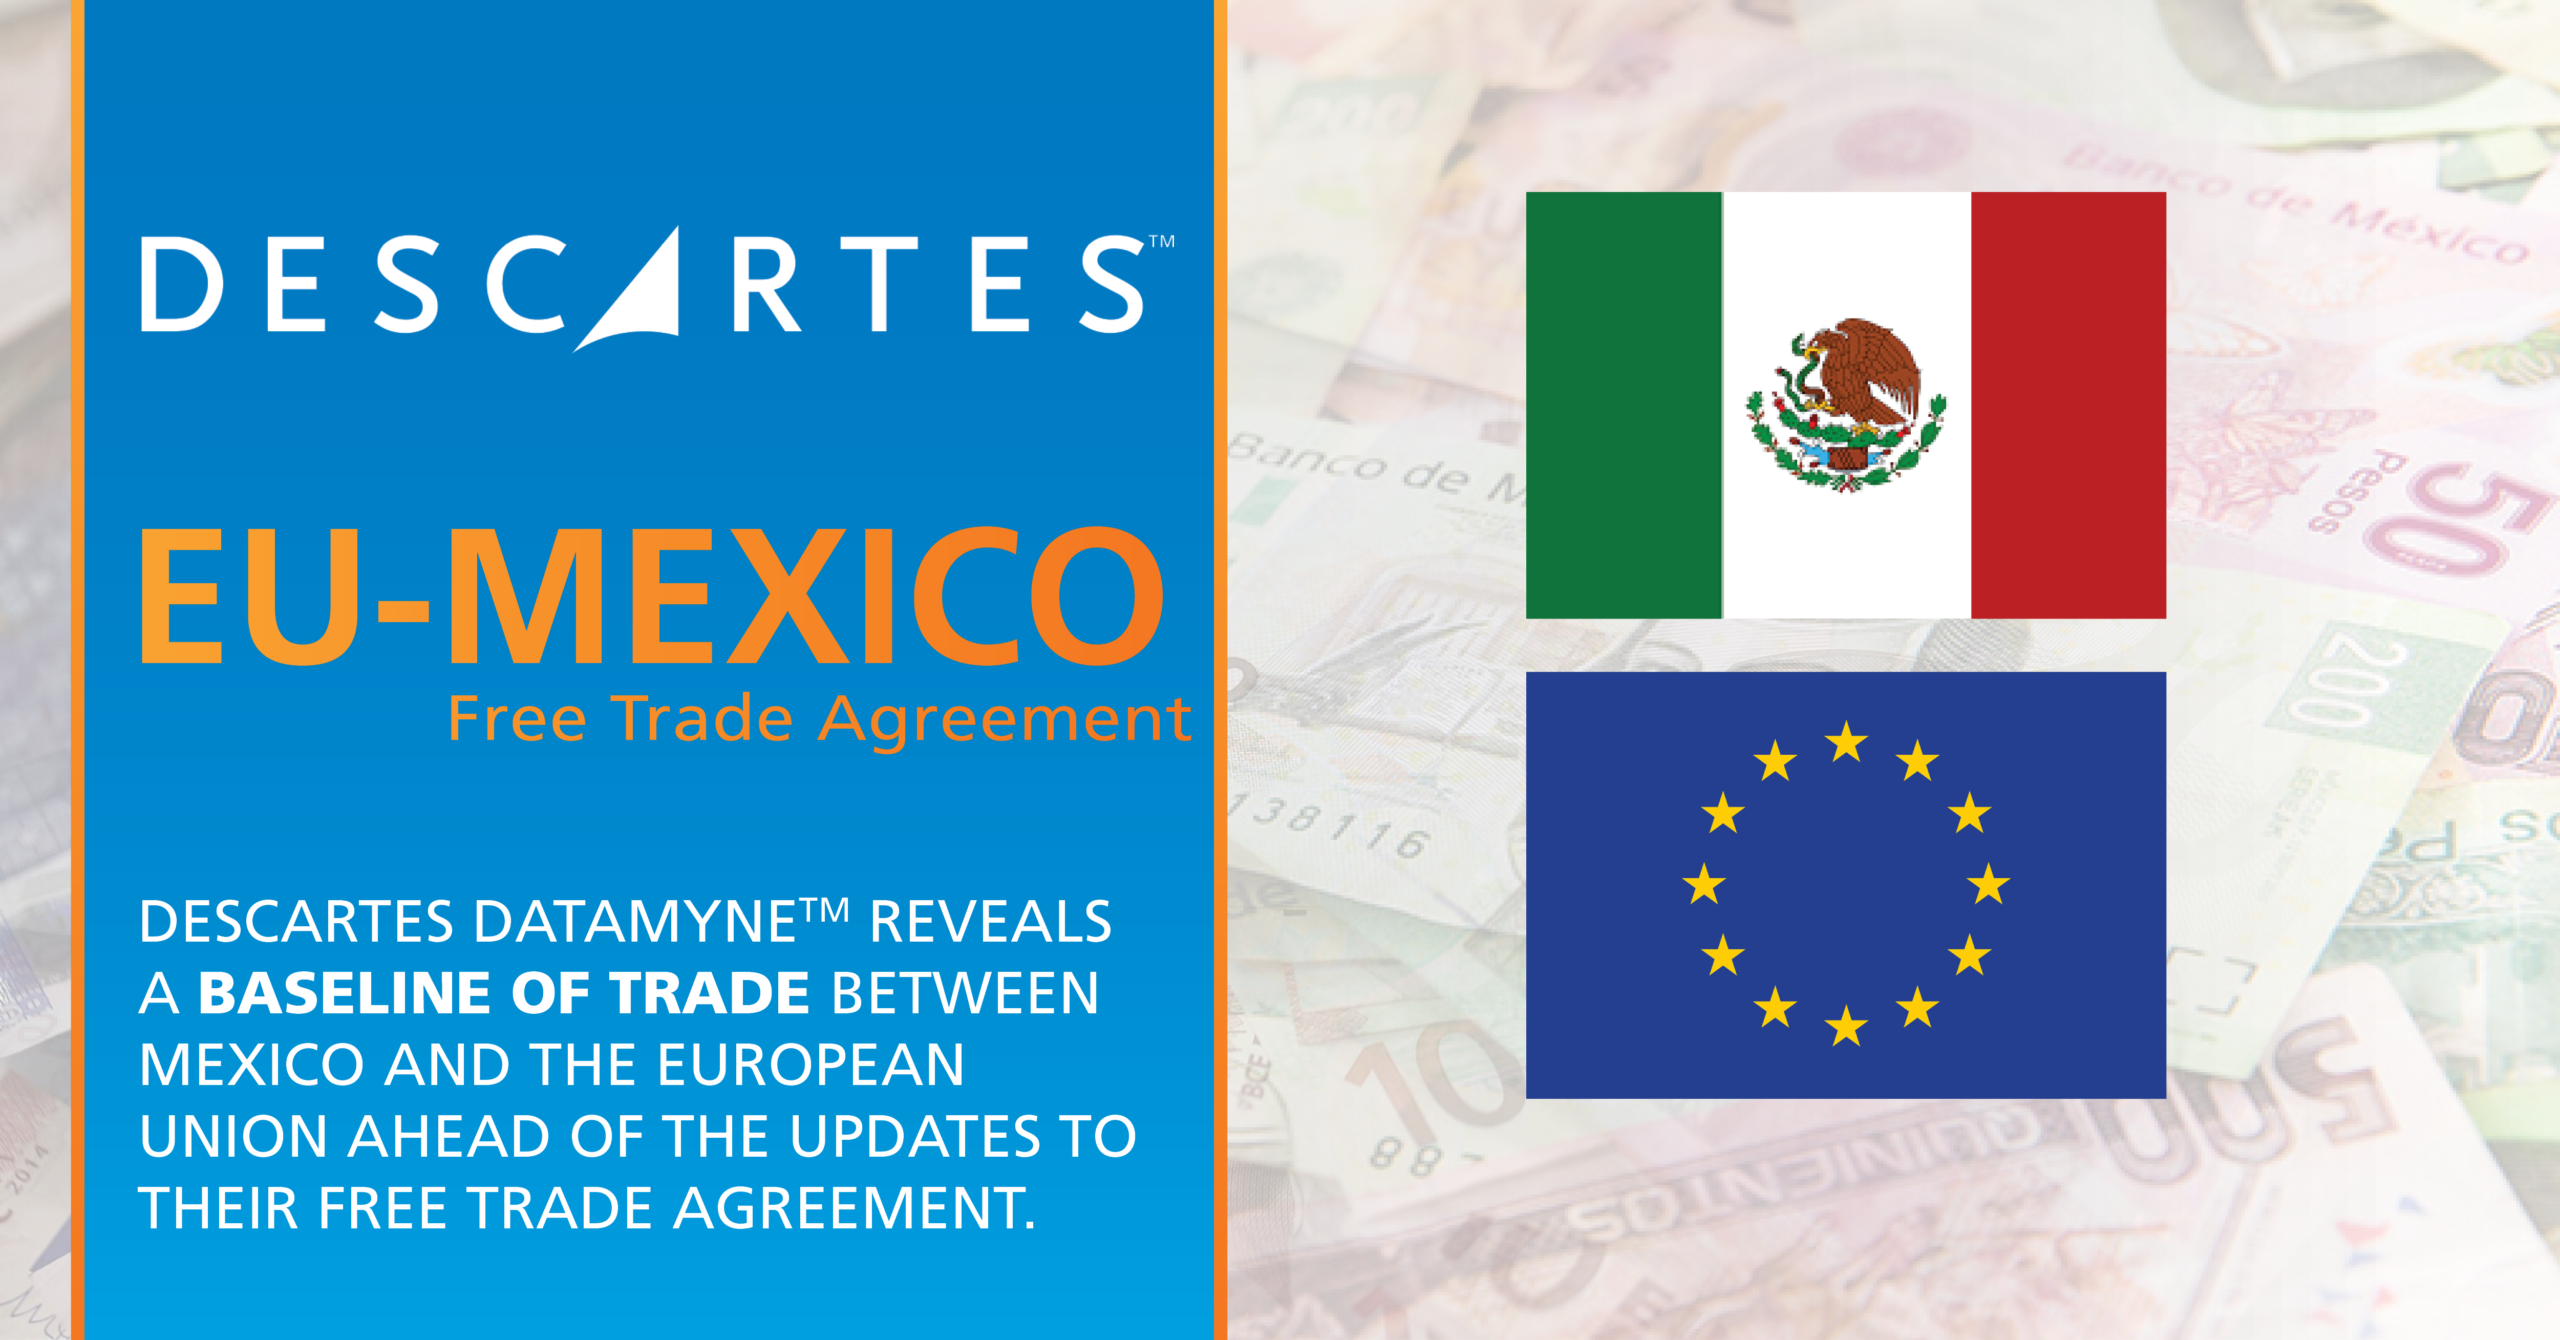 Updating the EU-Mexico Free Trade Agreement